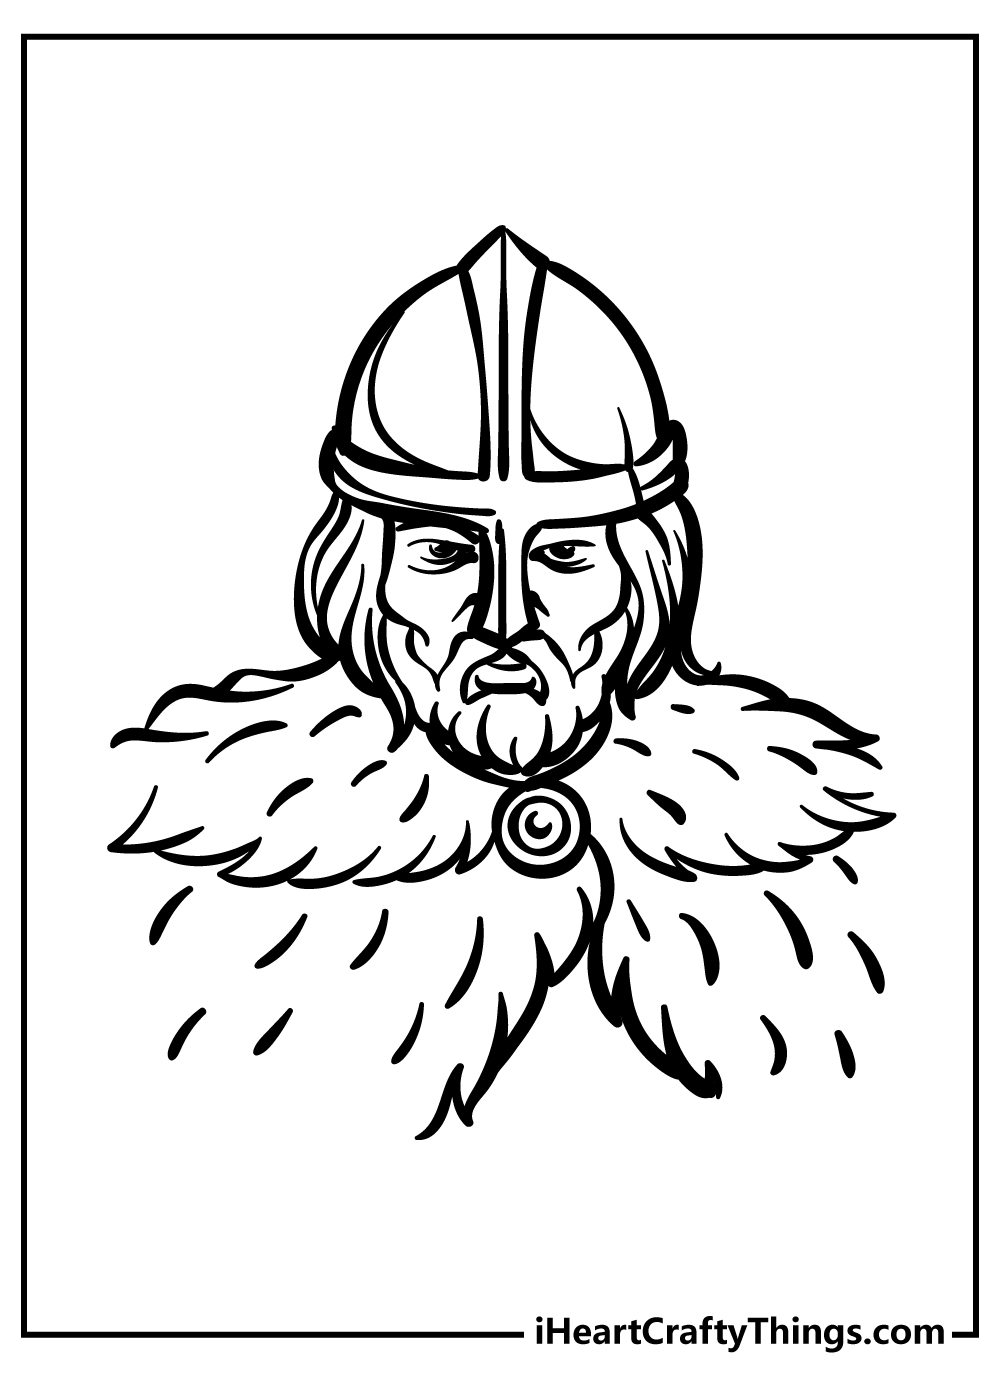 Viking Coloring Pages for adults free printable